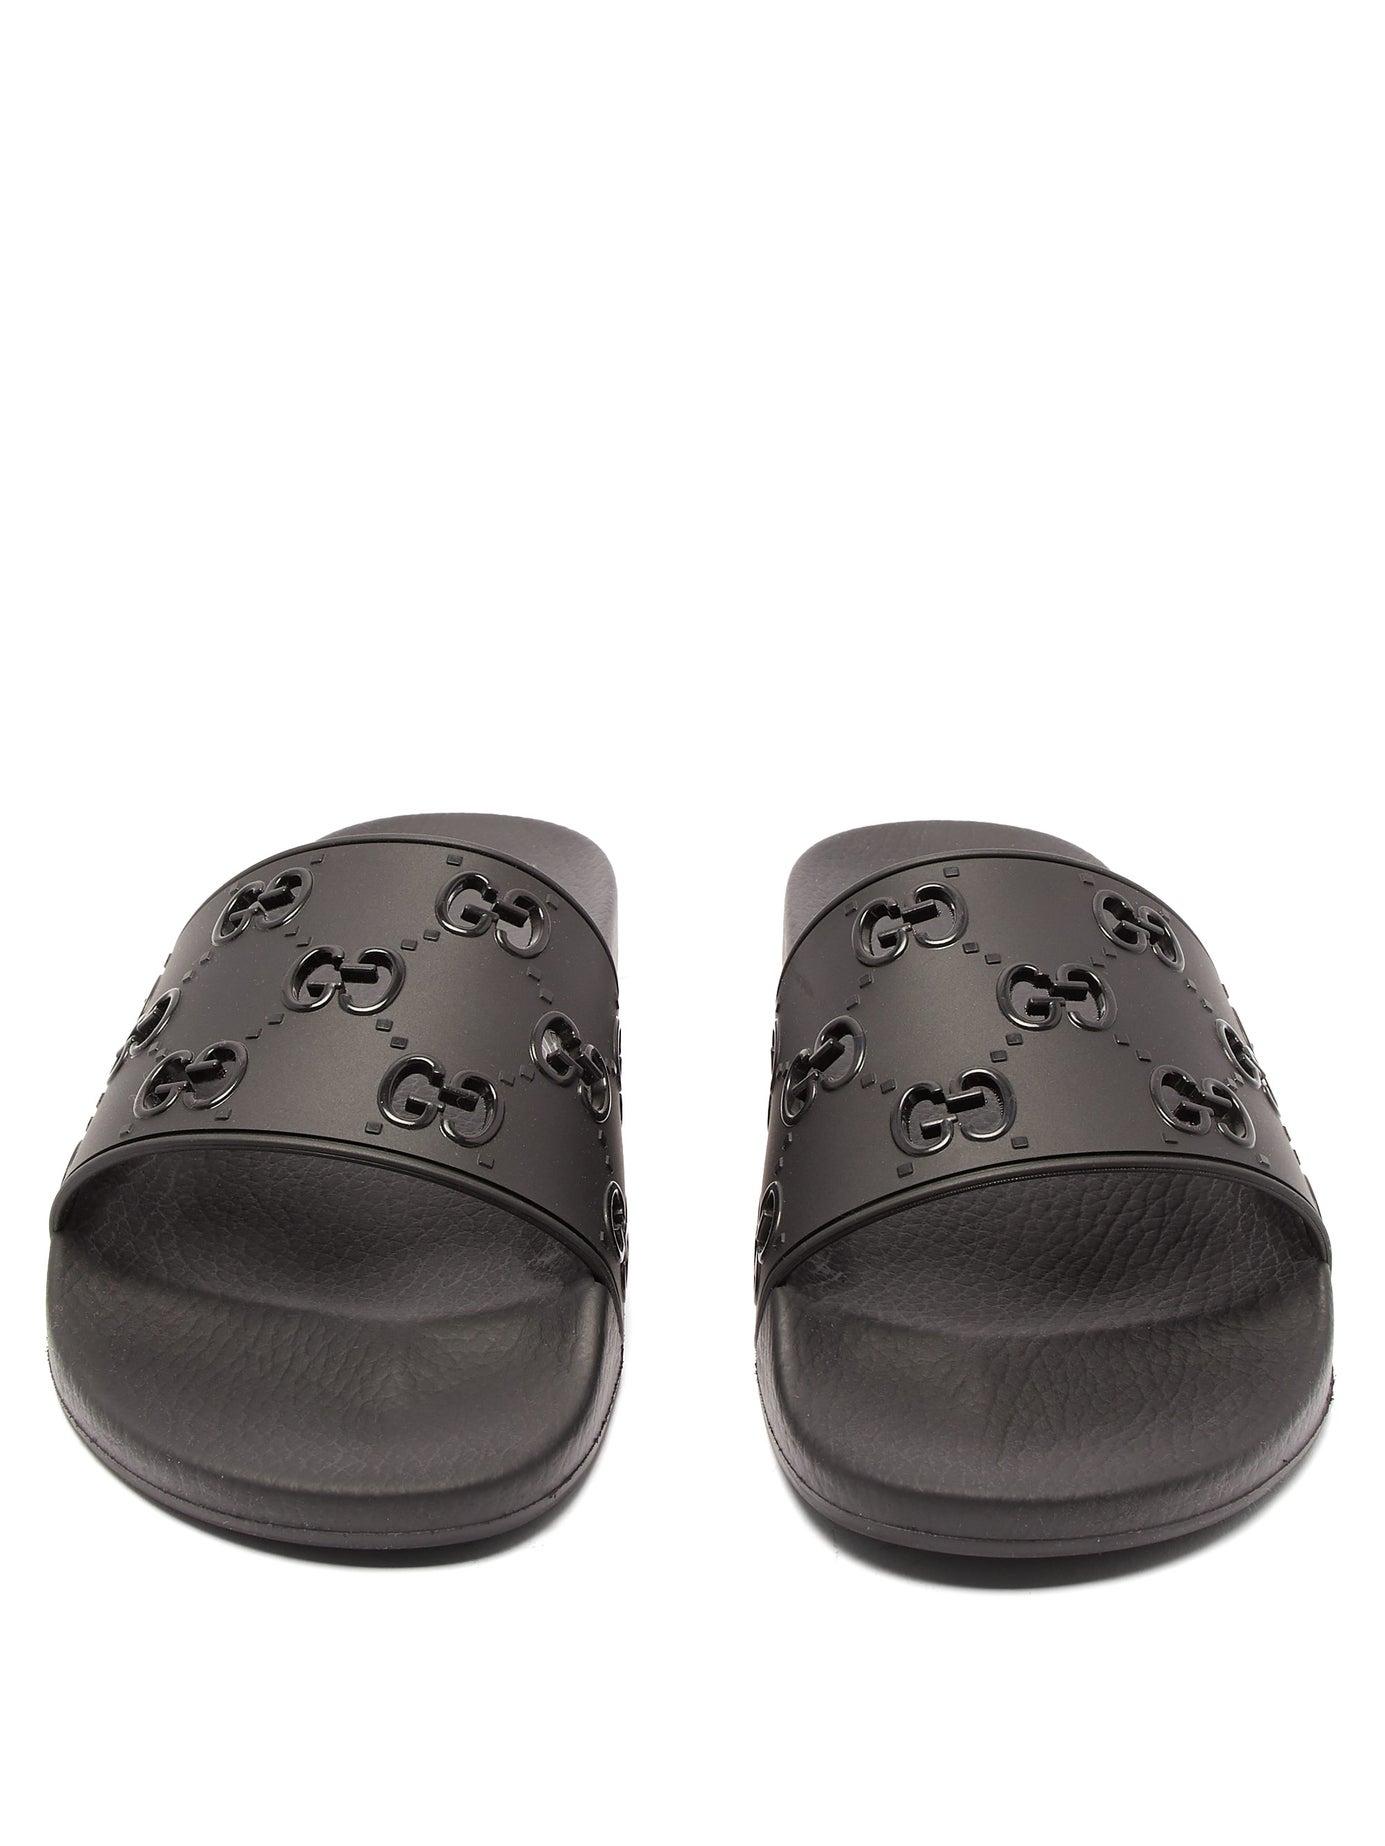 Gucci Slides Cut Out | lupon.gov.ph